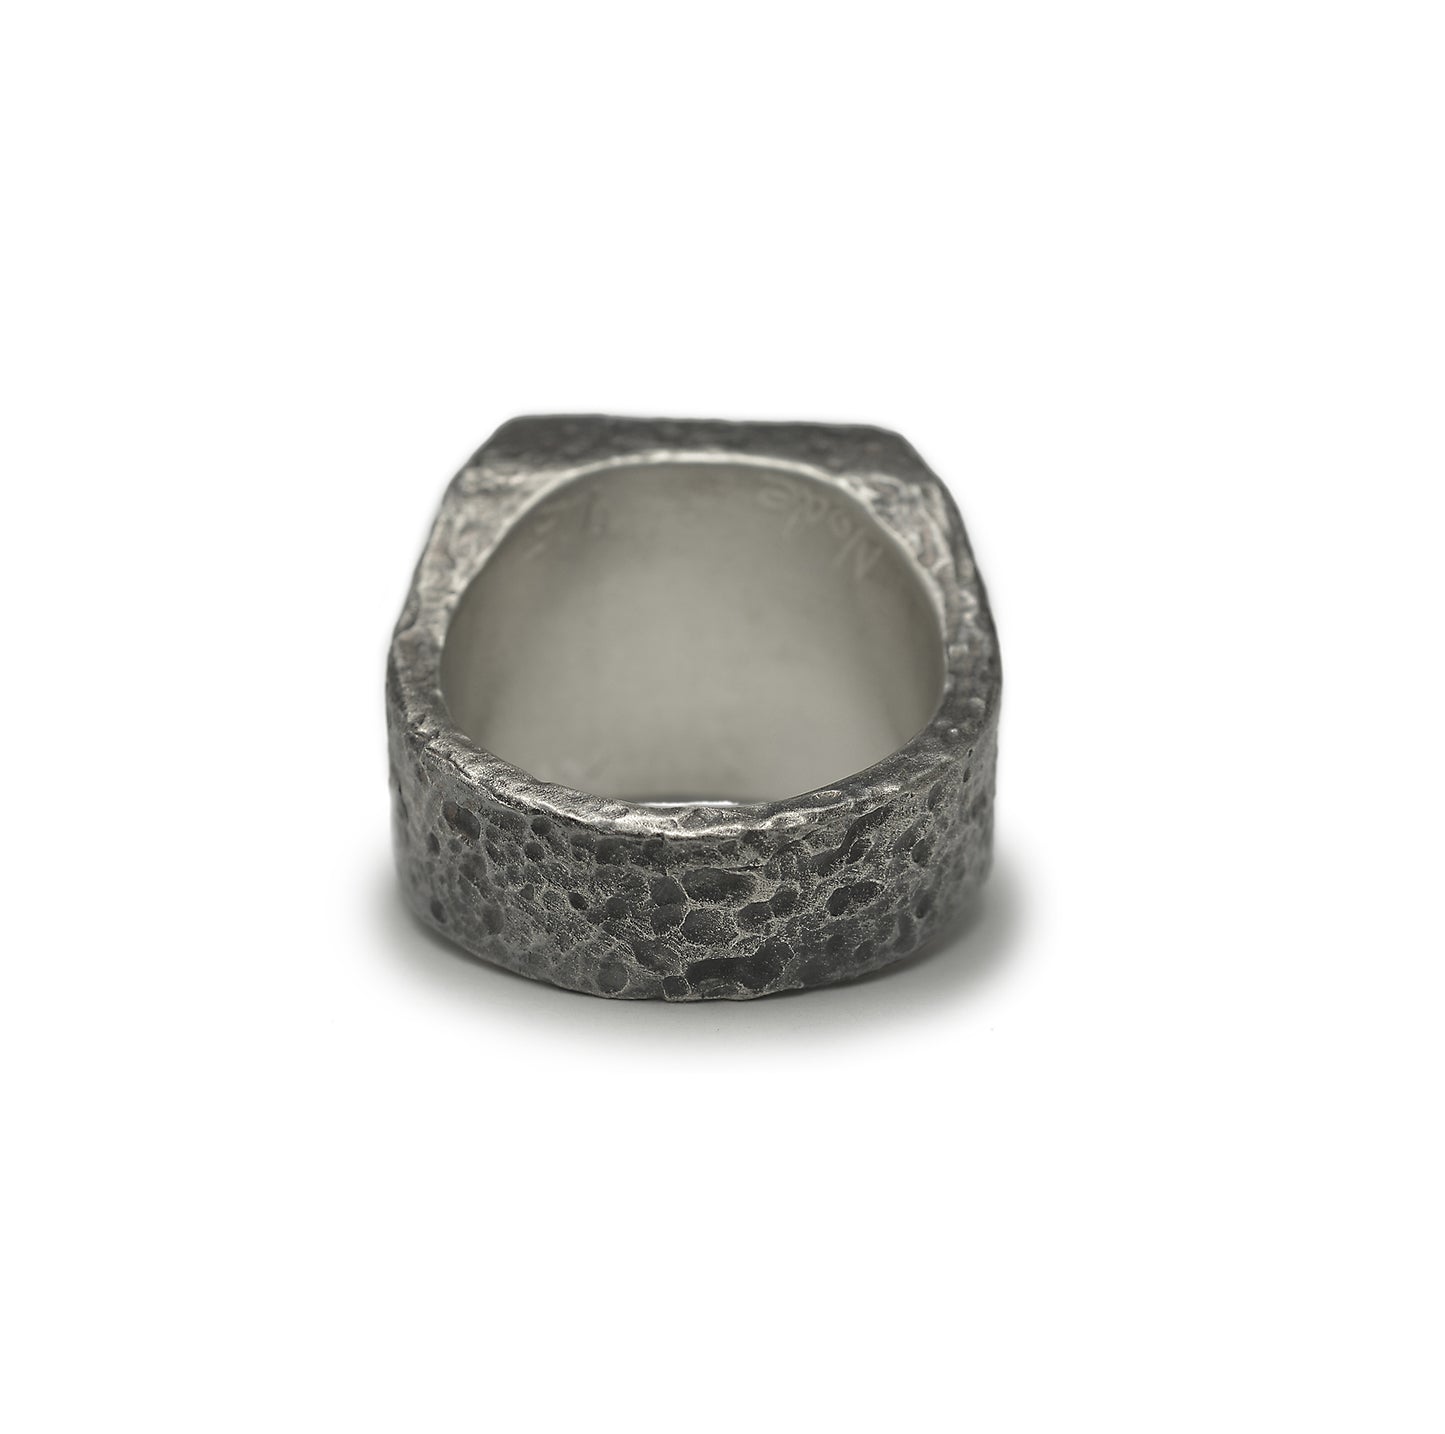 R-98 afterglow - Square sterling silver signet ring